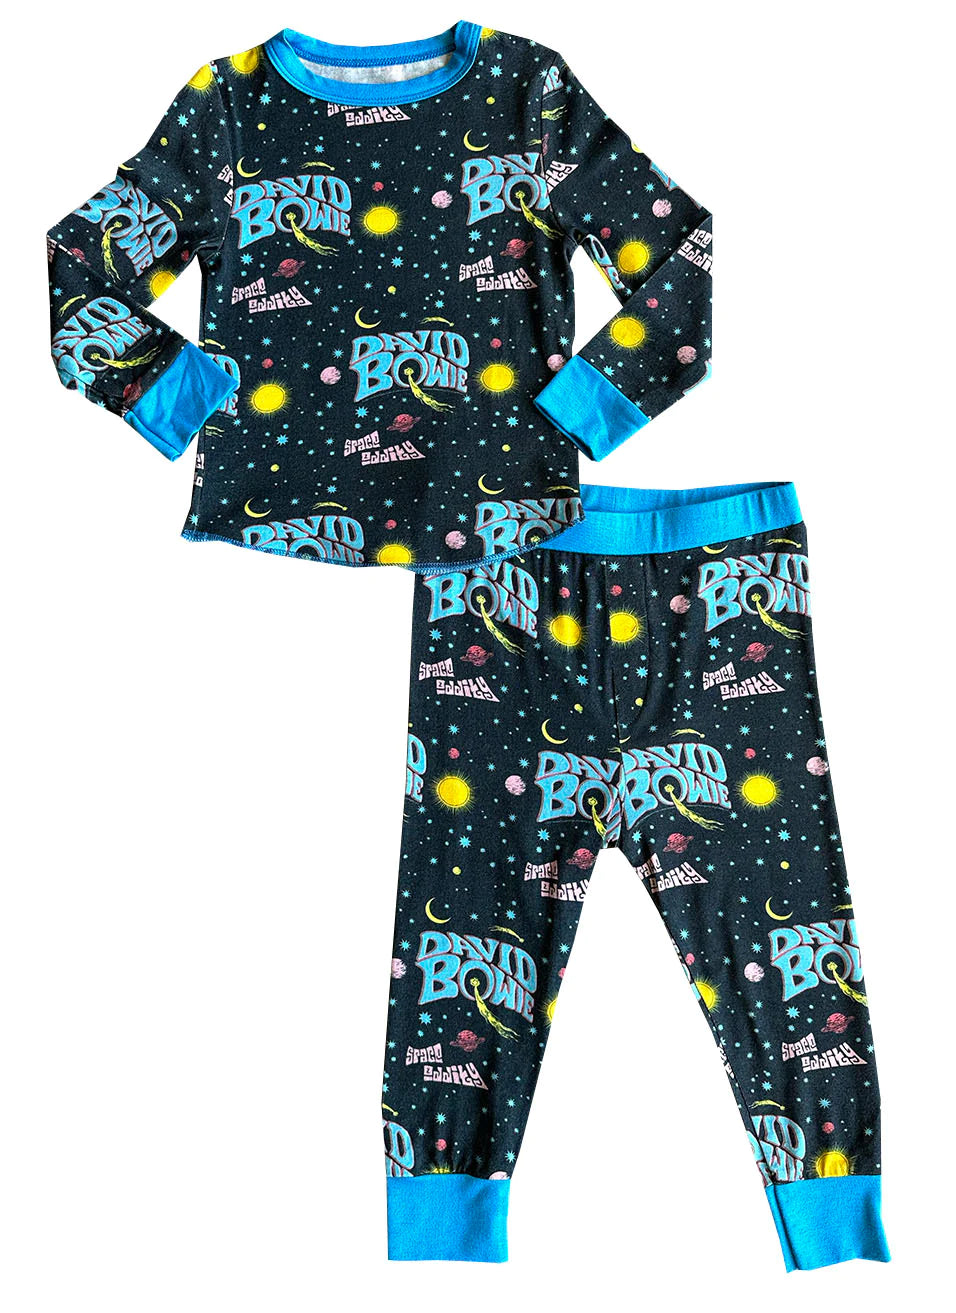 David Bowie Blue Bamboo Thermal Set